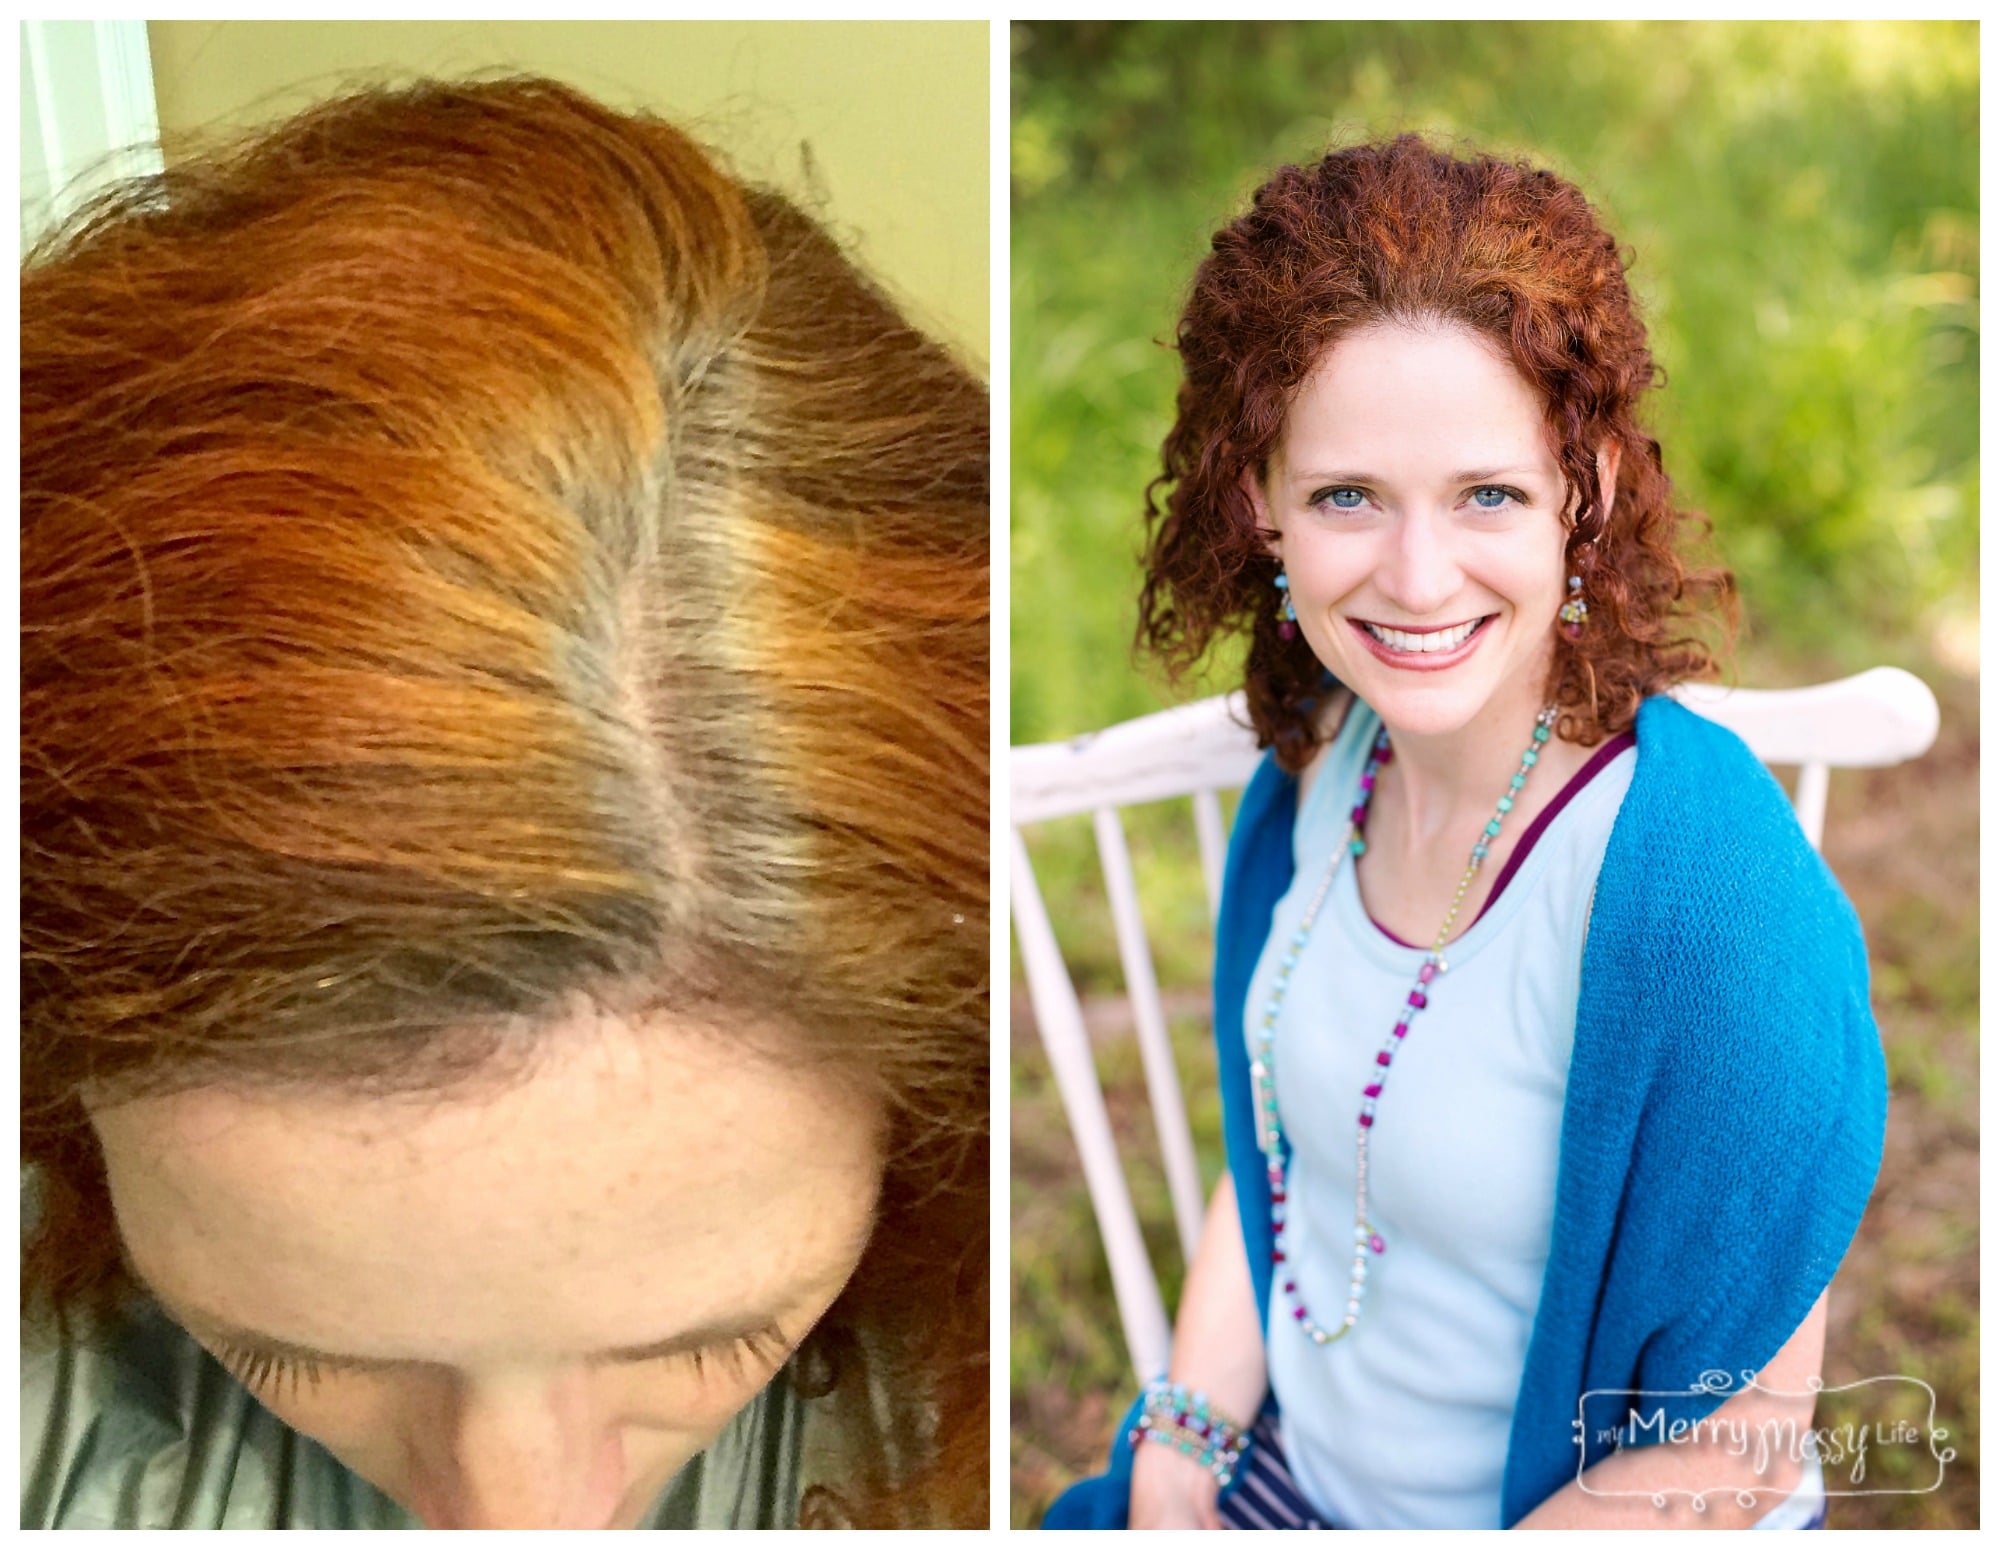 Henna Hair Dye Tutorial - All Natural, Safe and Healthy – My Merry Messy  Life